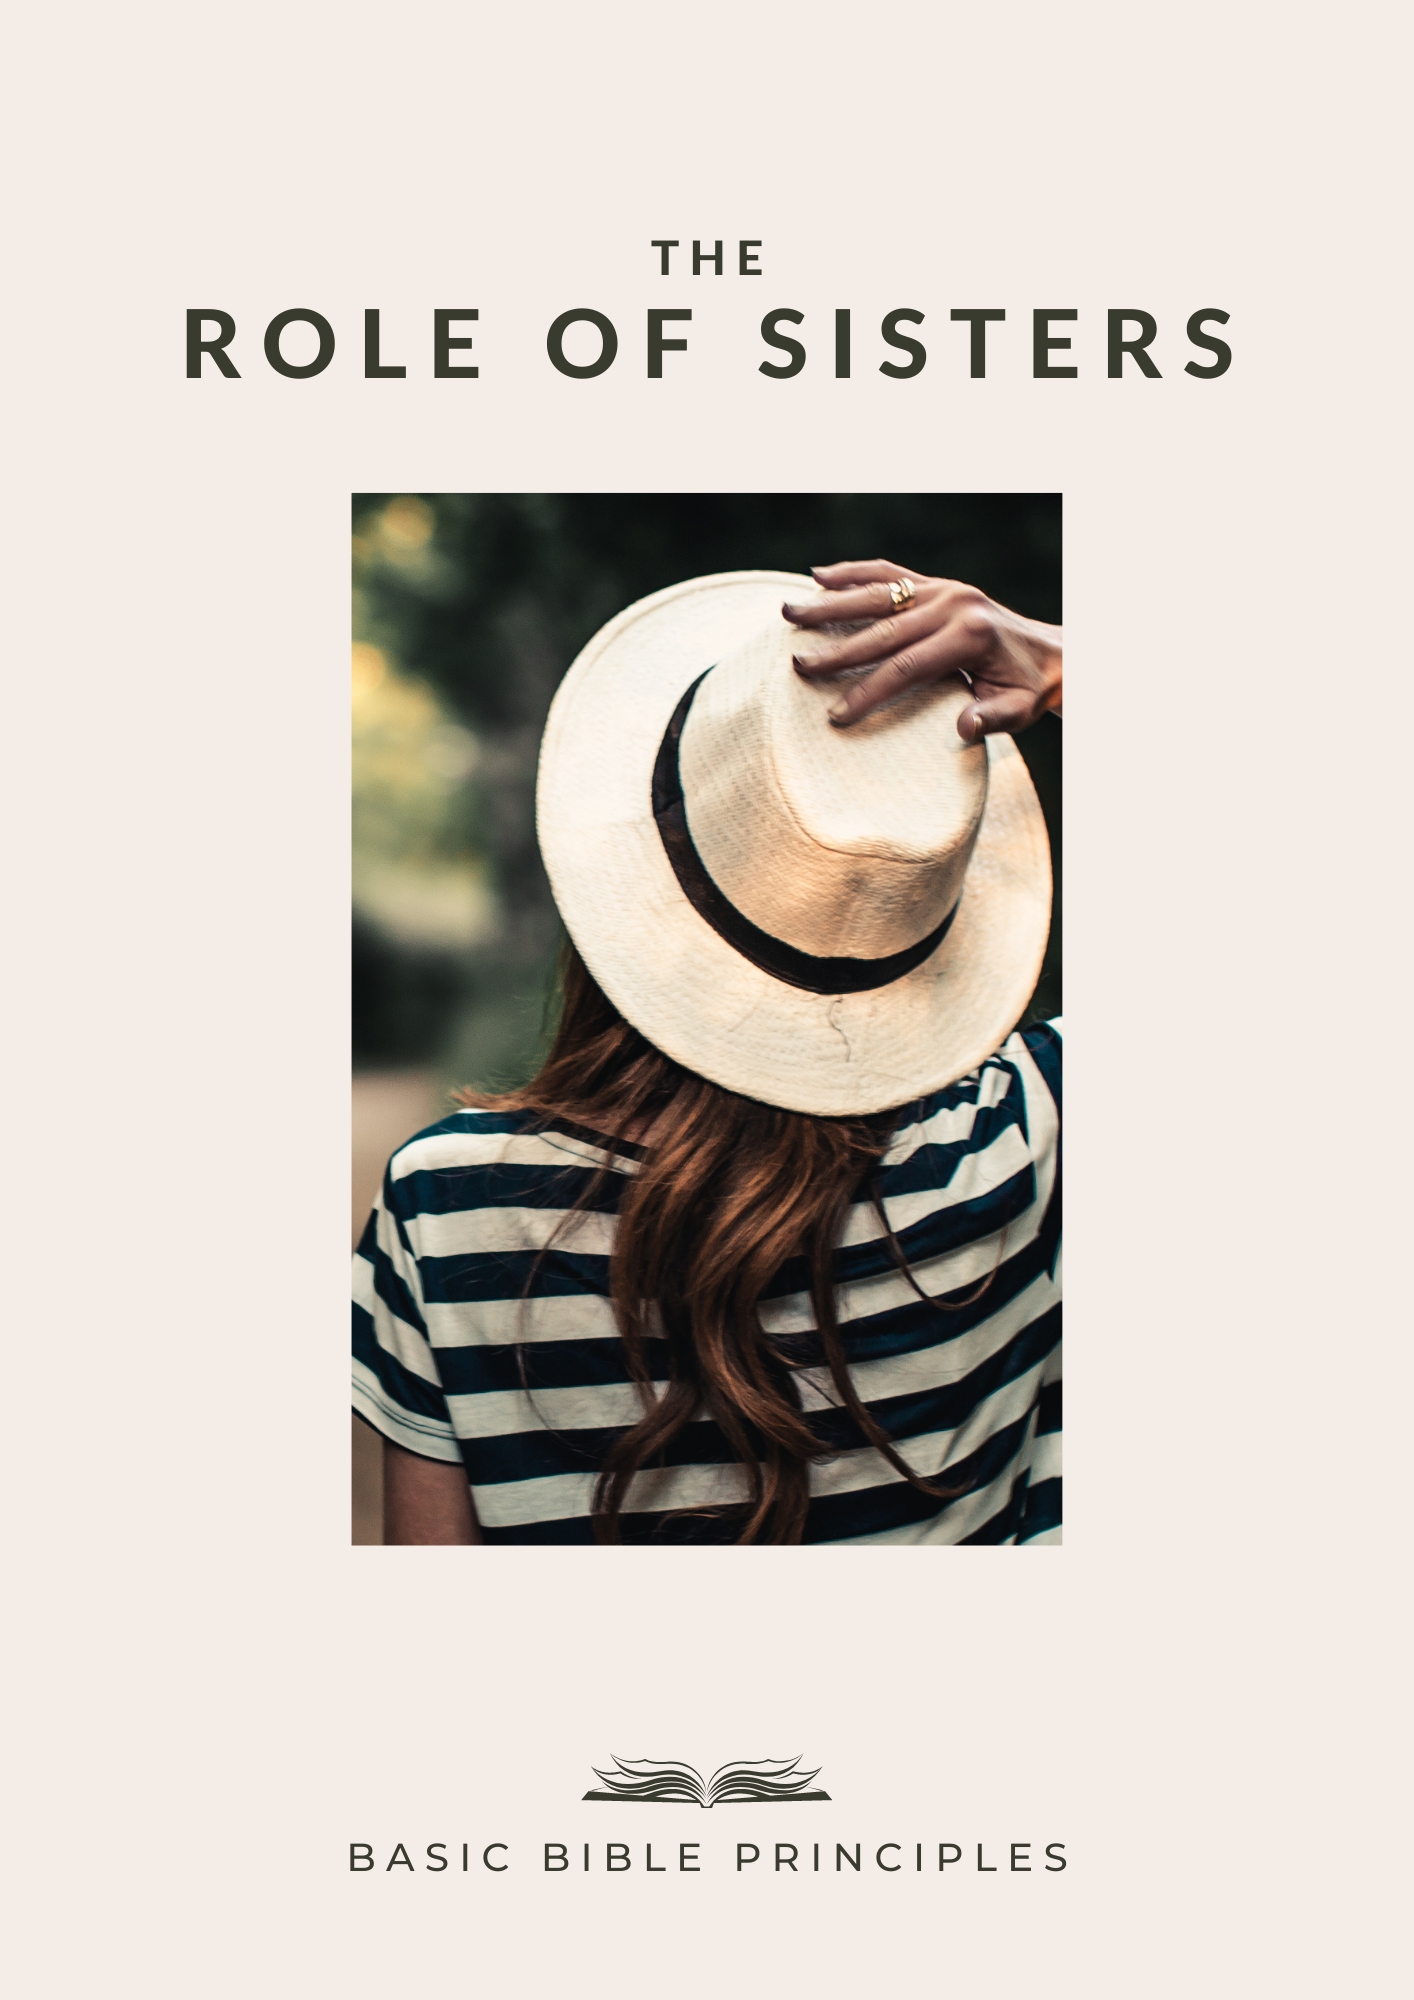 Basic Bible Principles: THE ROLE OF SISTERS